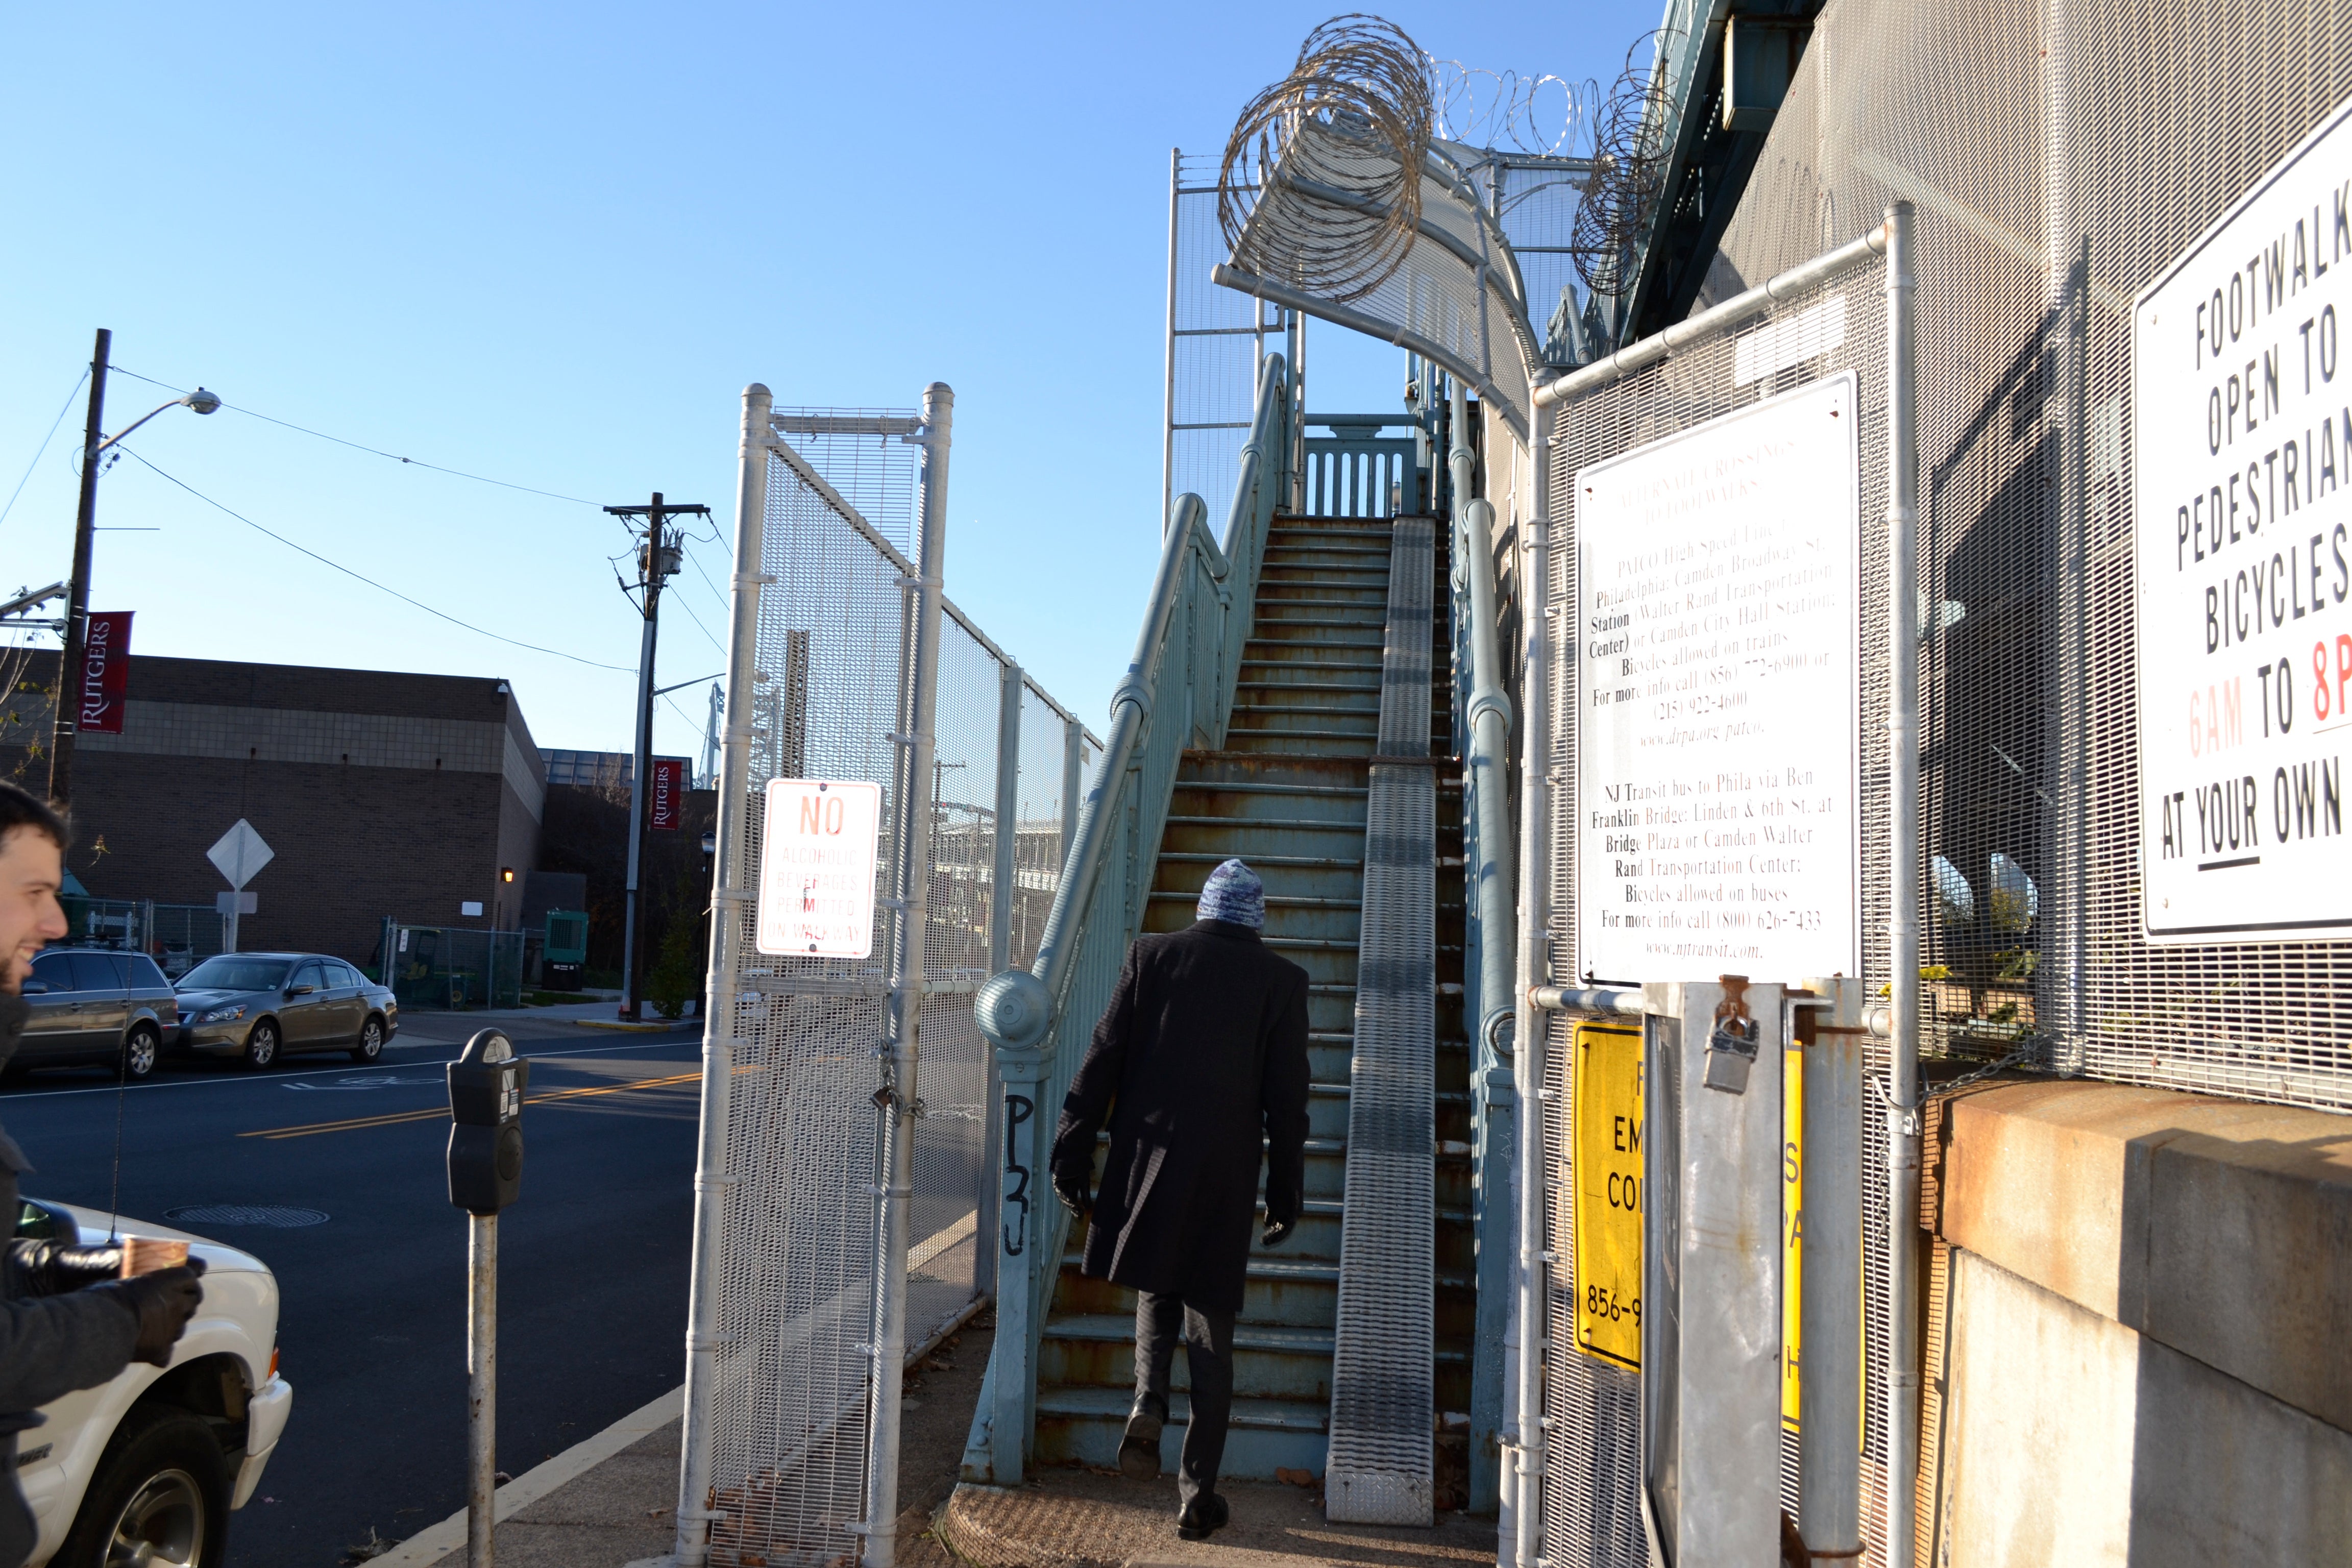 DRPA received $400,000 to replace the stairs up to the Ben Franklin Bridge with an ADA-compliant bicycle and pedestrian ramp